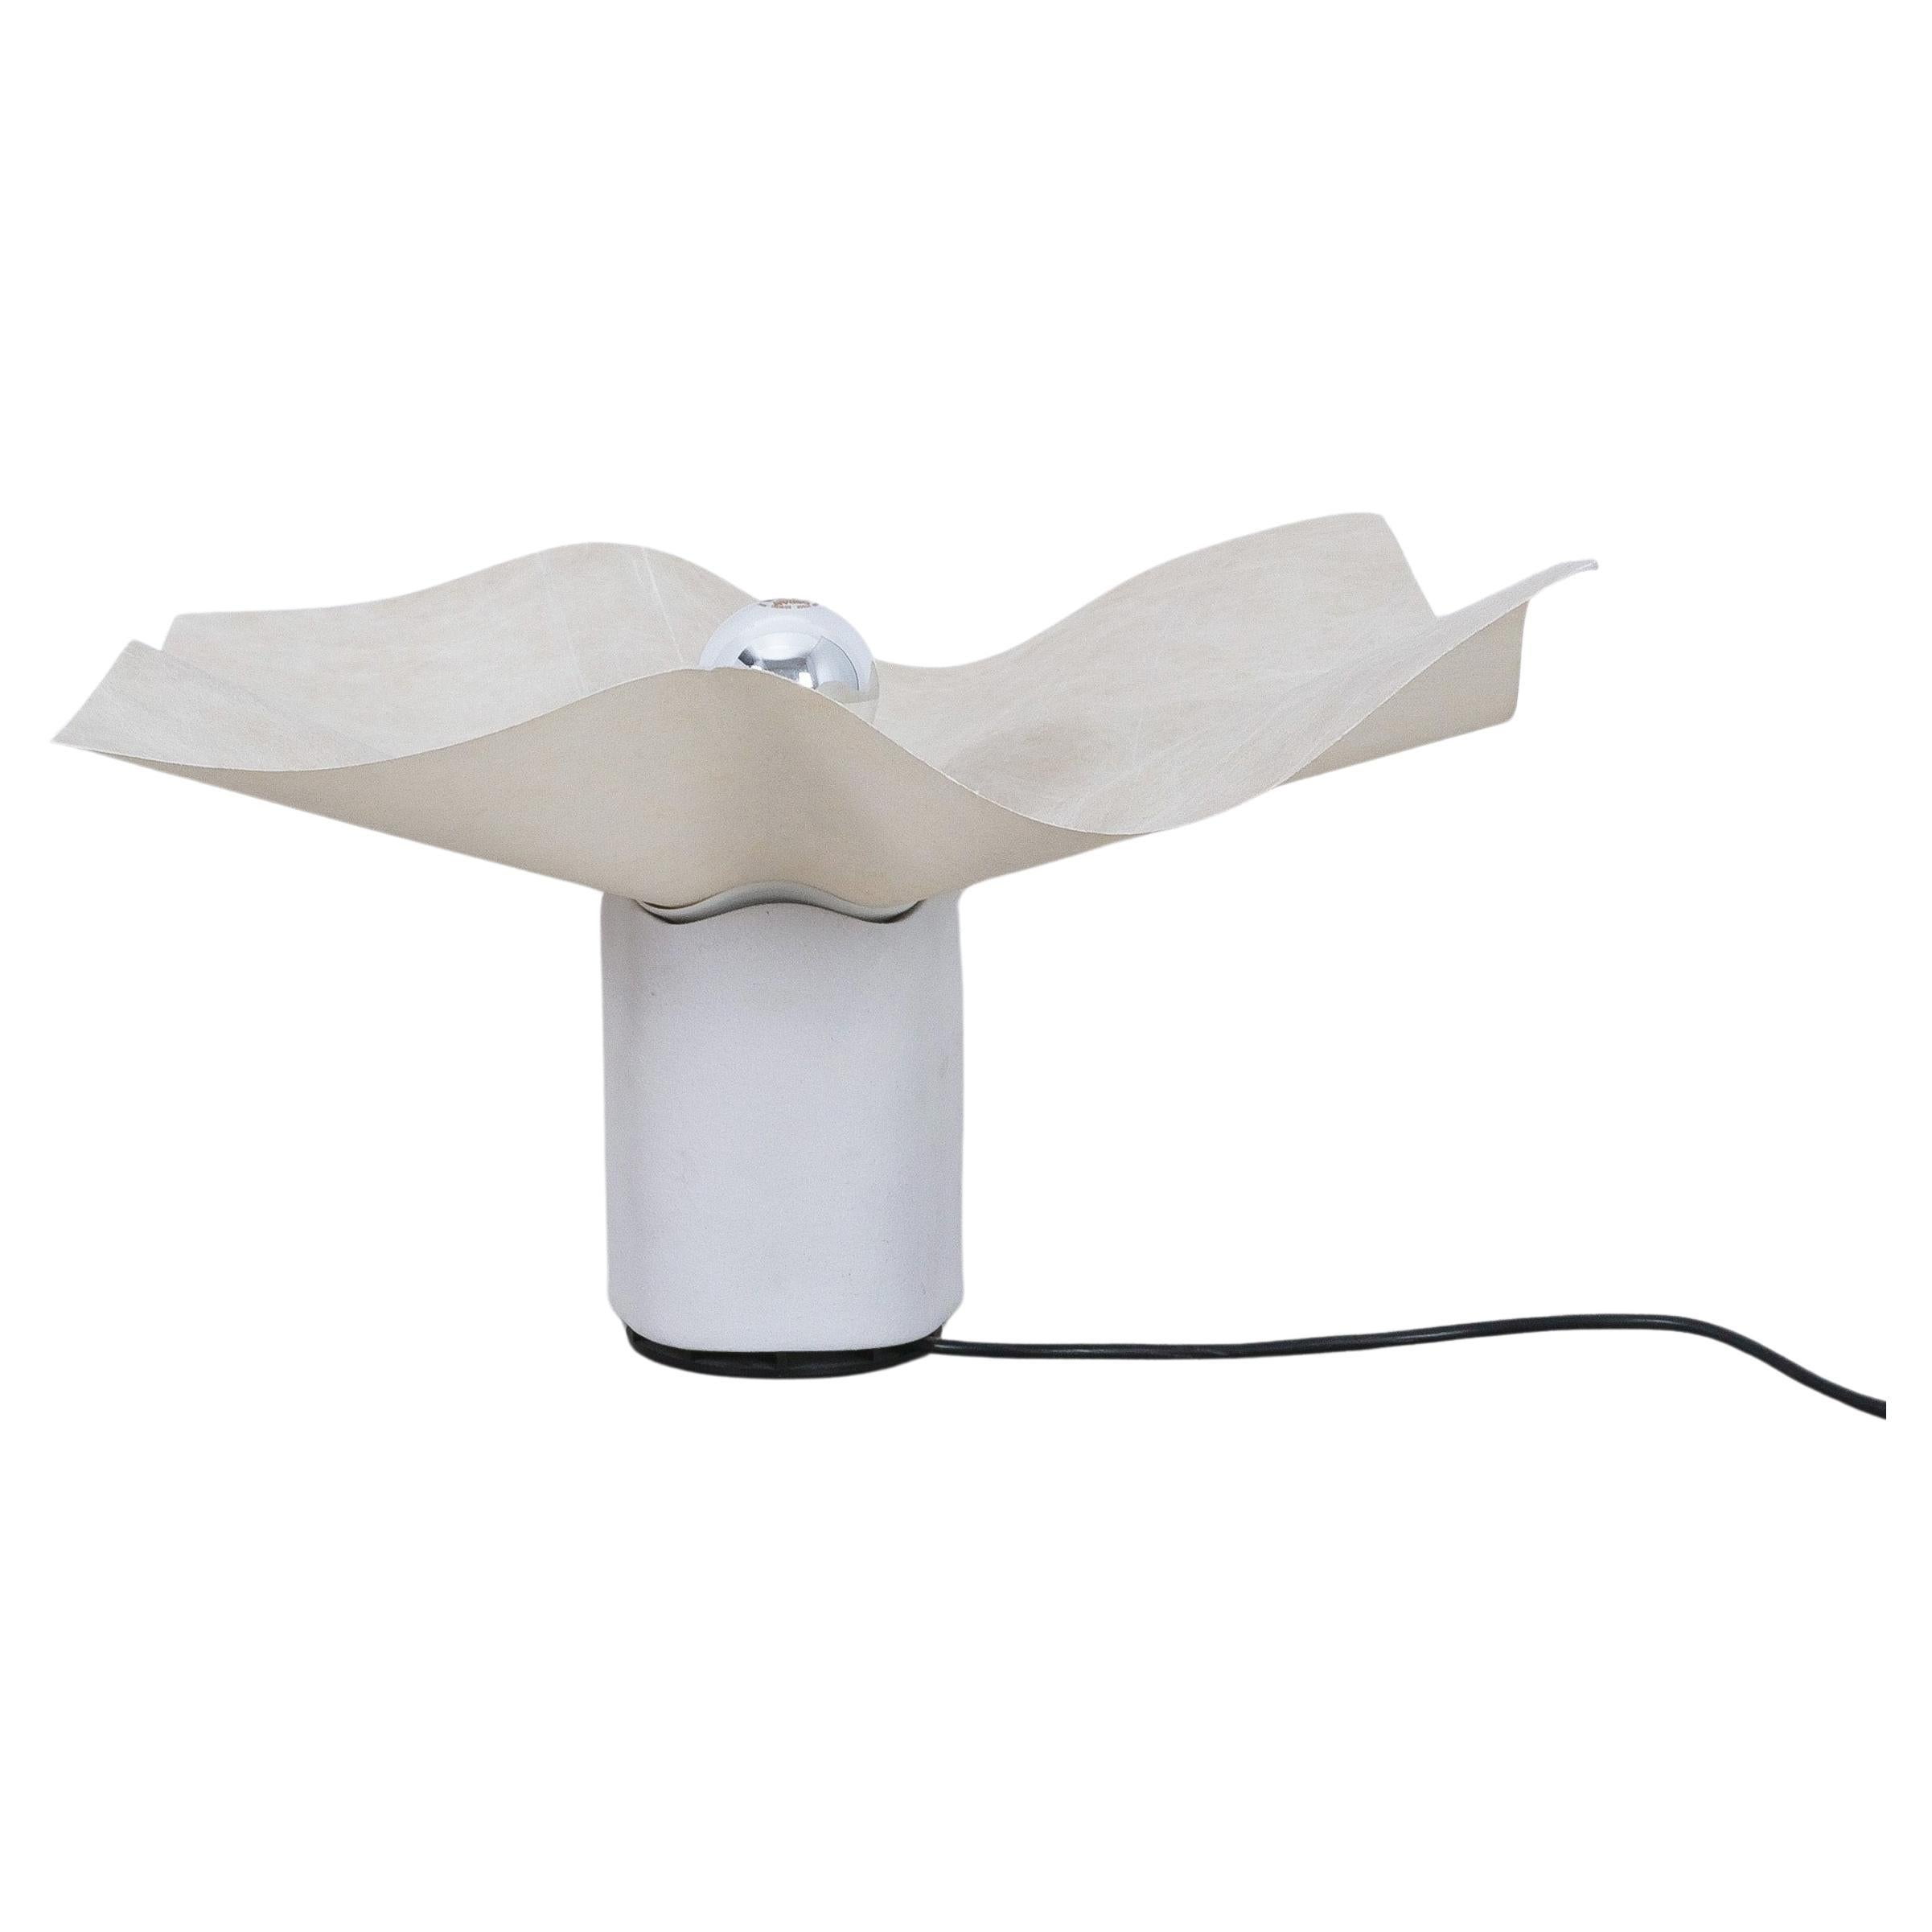 Mario Bellini table light Area 50 by Artemide, Italy, 1976

Rare iconic ceramic lamp. It shows a beautiful rough-edged ceramic socket-like base and the trade-mark flying piece of resin-paper shade as the other models that we are currently offering.